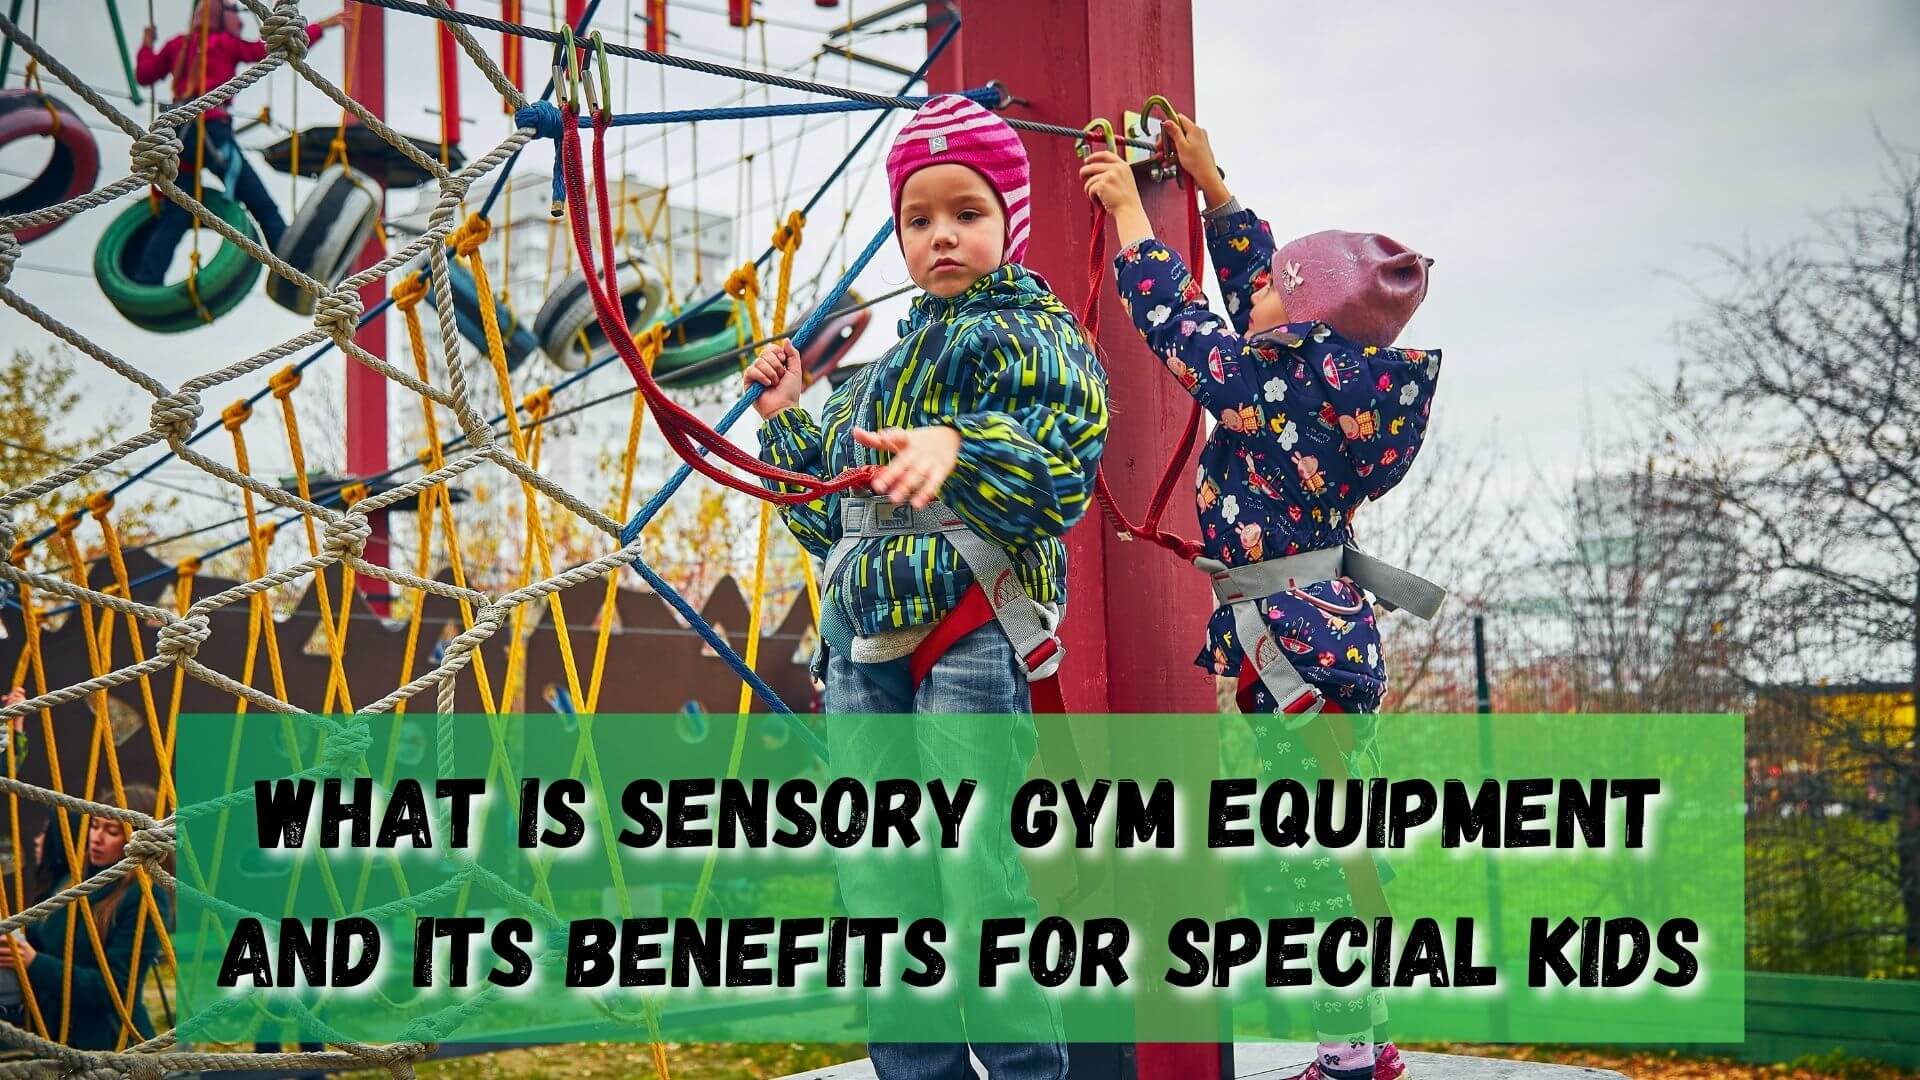 Sensory gym equipment is specially designed to help special kids explore and make sense of the world around them. Read its benefits here.